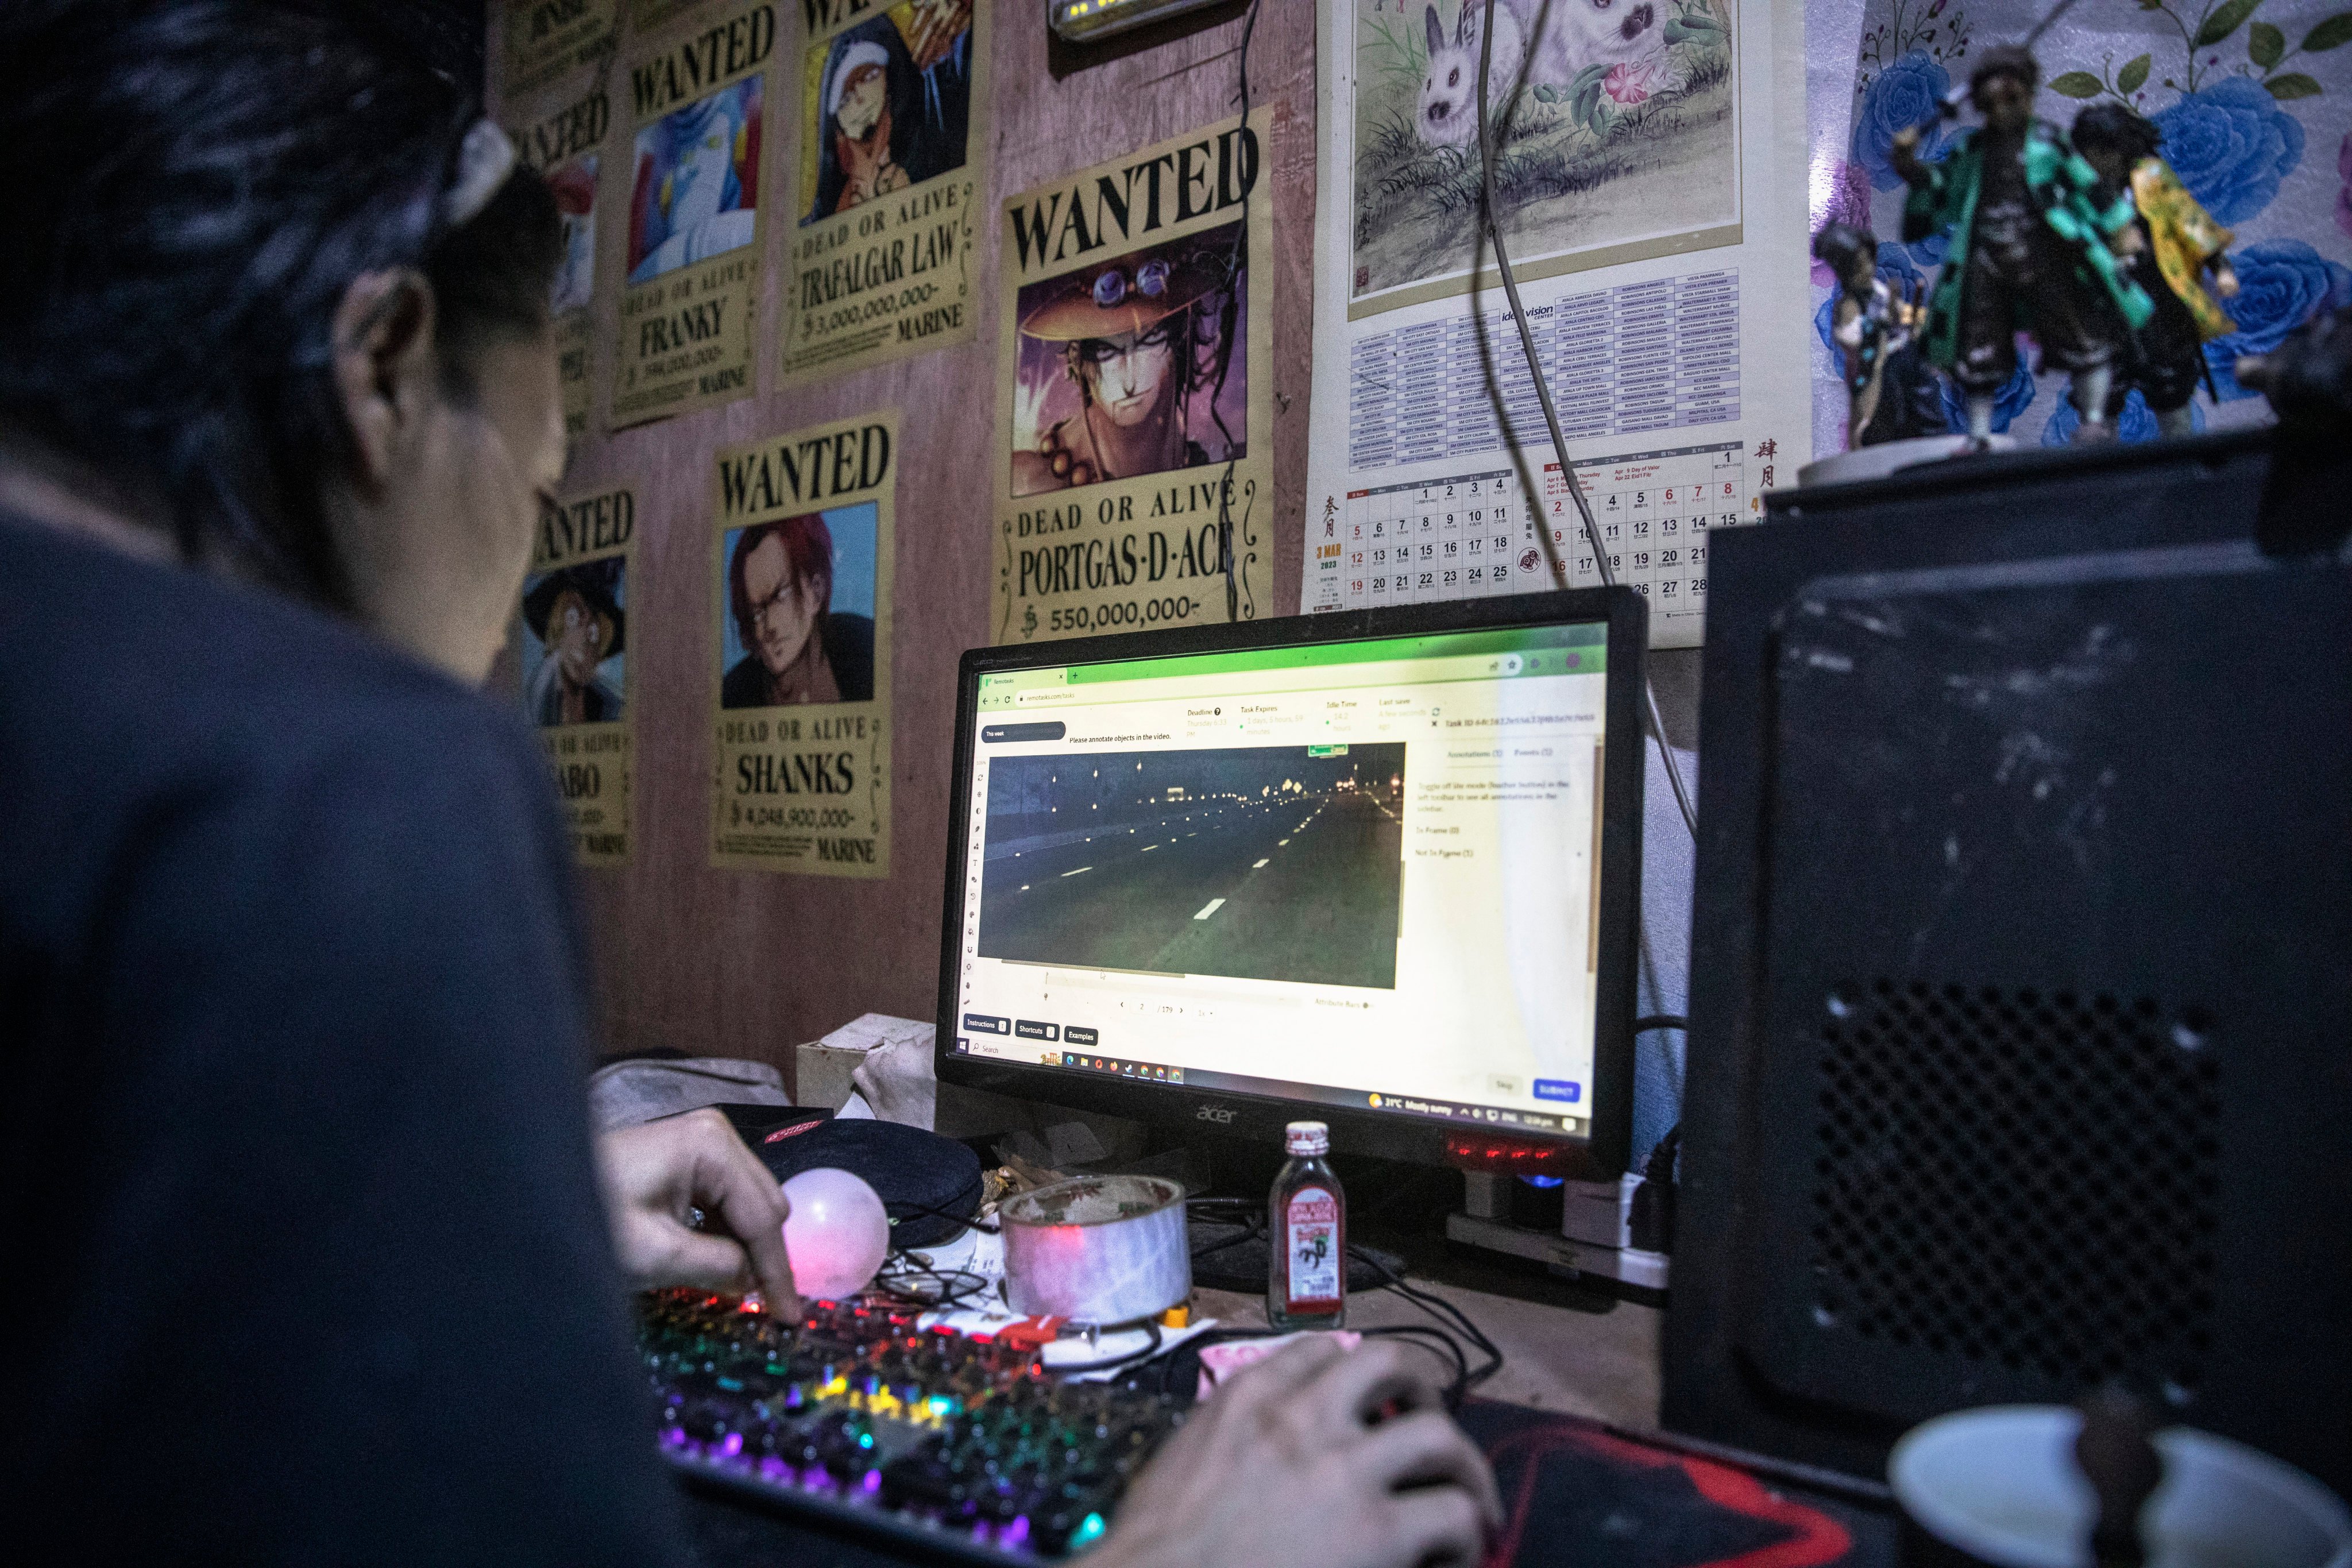 “Delmar”, a Filipino worker who helps train AI models, performs a task on the online platform Remotasks. While the artificial intelligence development industry has created opportunities in the Philippines, a lack of decent pay and training has raised concerns. Photo: Per Elinder Liljas